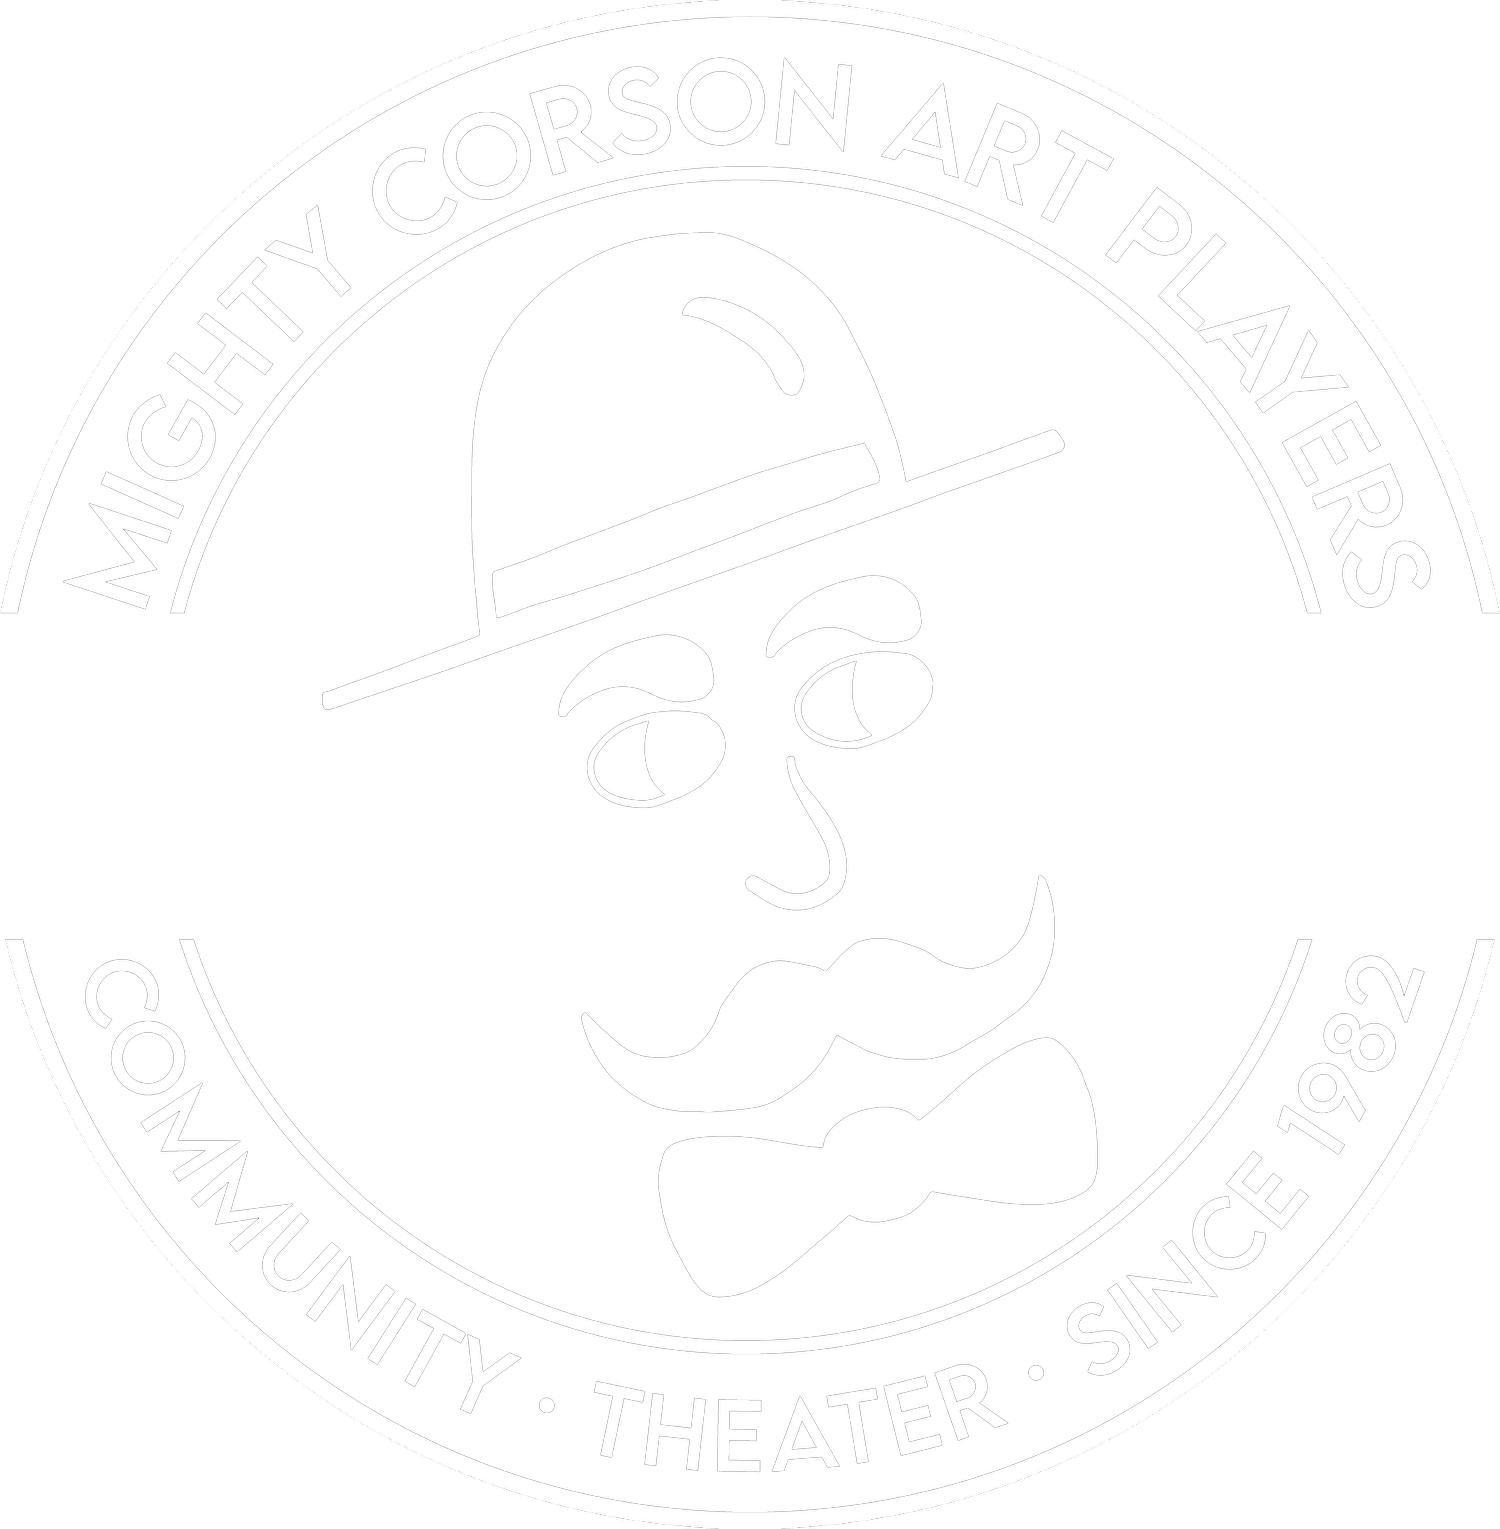 The Mighty Corson Art Players